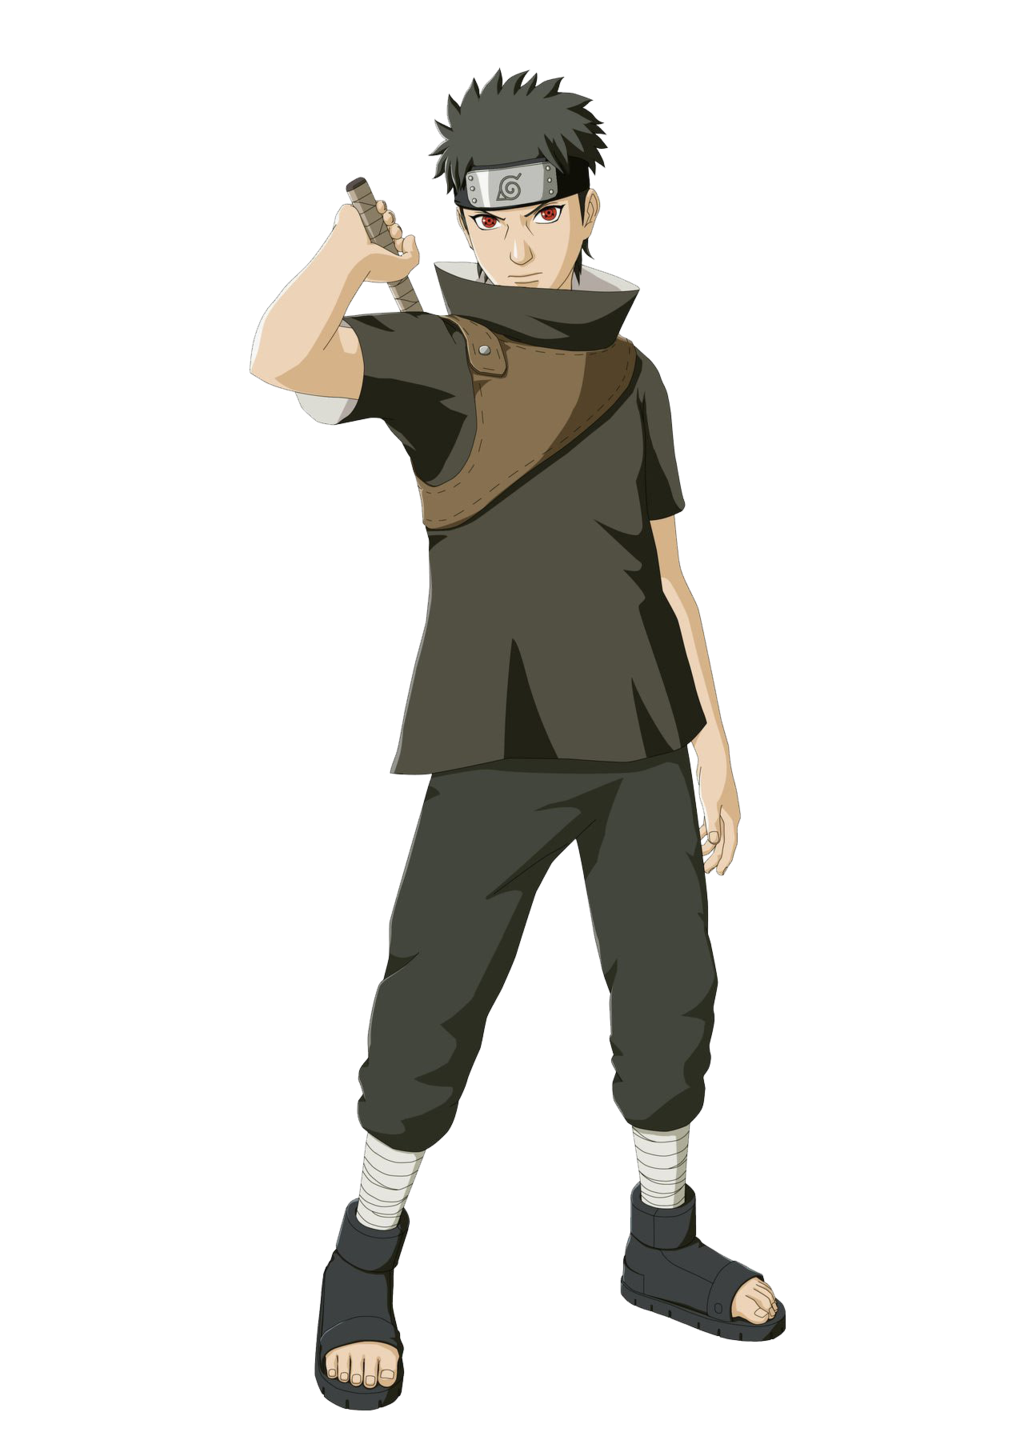 How long was the cool down time for Shisui before he could use his